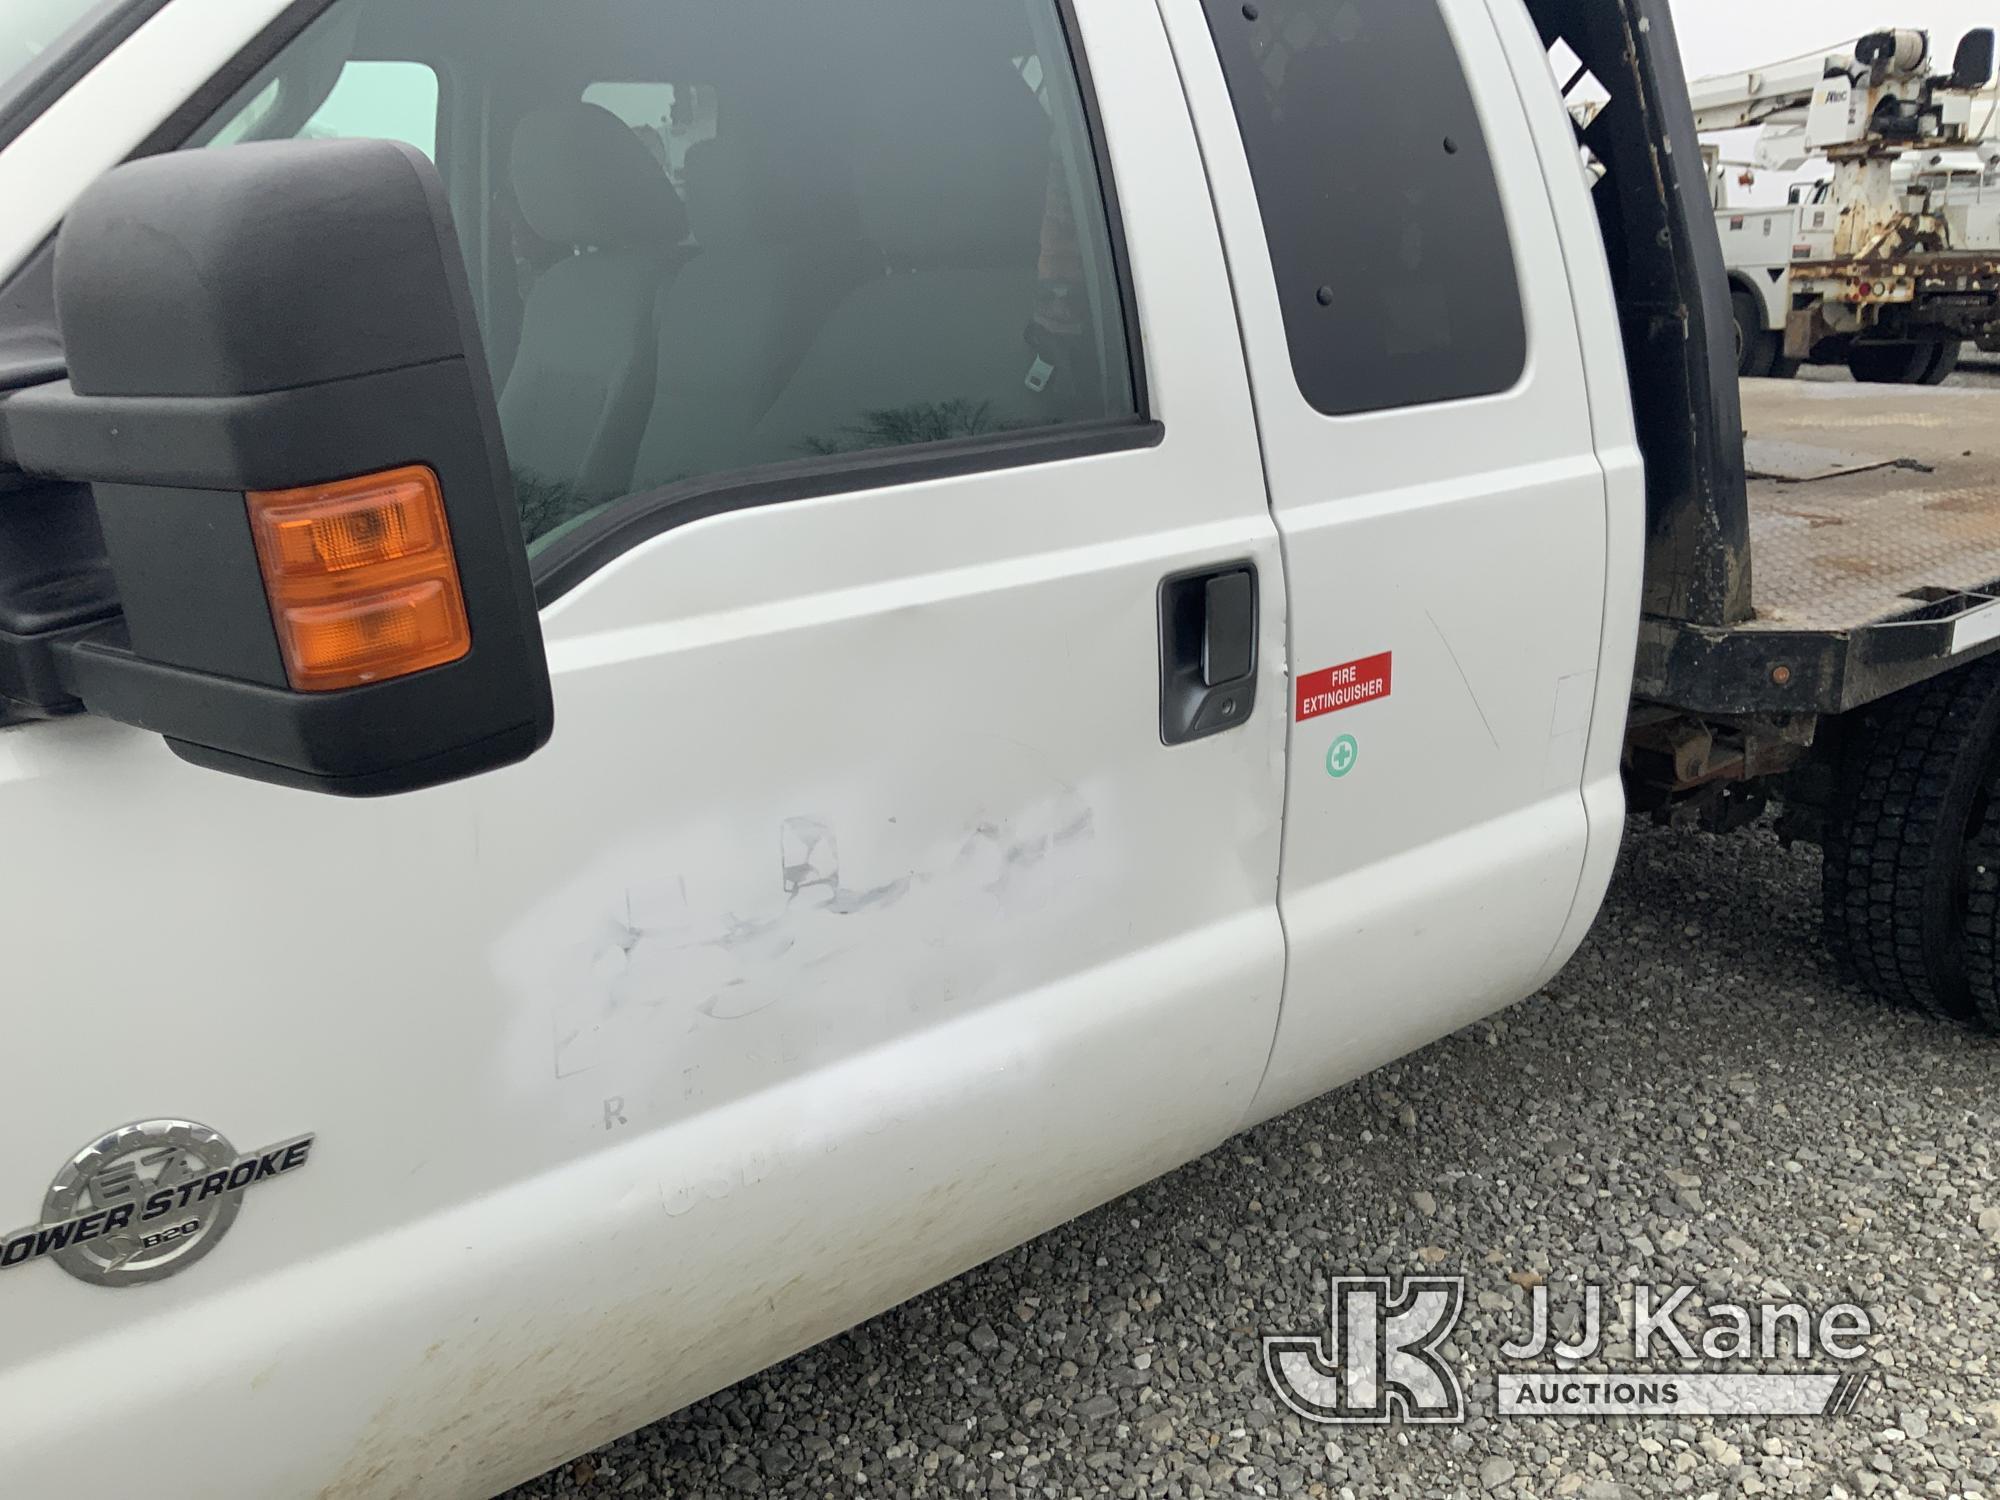 (Hawk Point, MO) 2011 Ford F550 Flatbed Truck Runs & moves) (Body & Paint Damage. Seller States: DEF